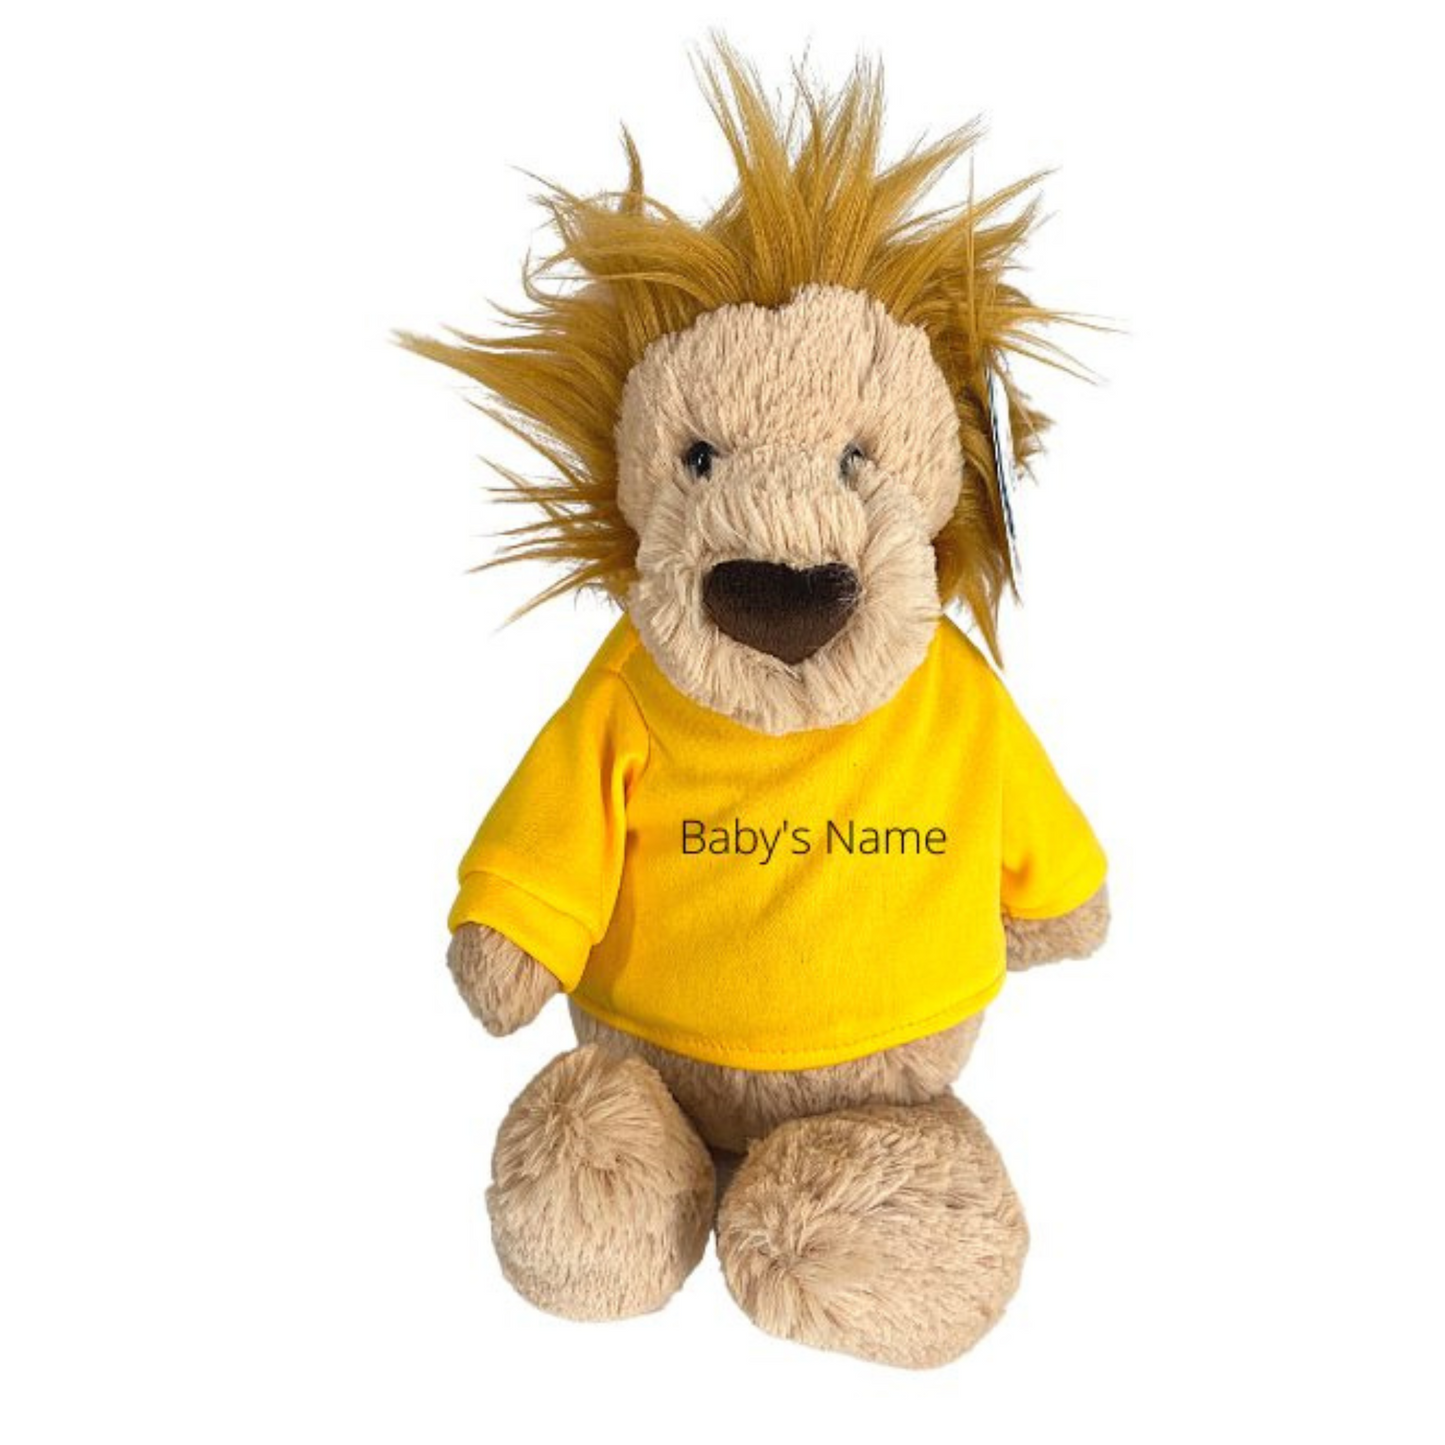 Personalized Jellycat Tee Shirts for Plush Toys (Plush not included)